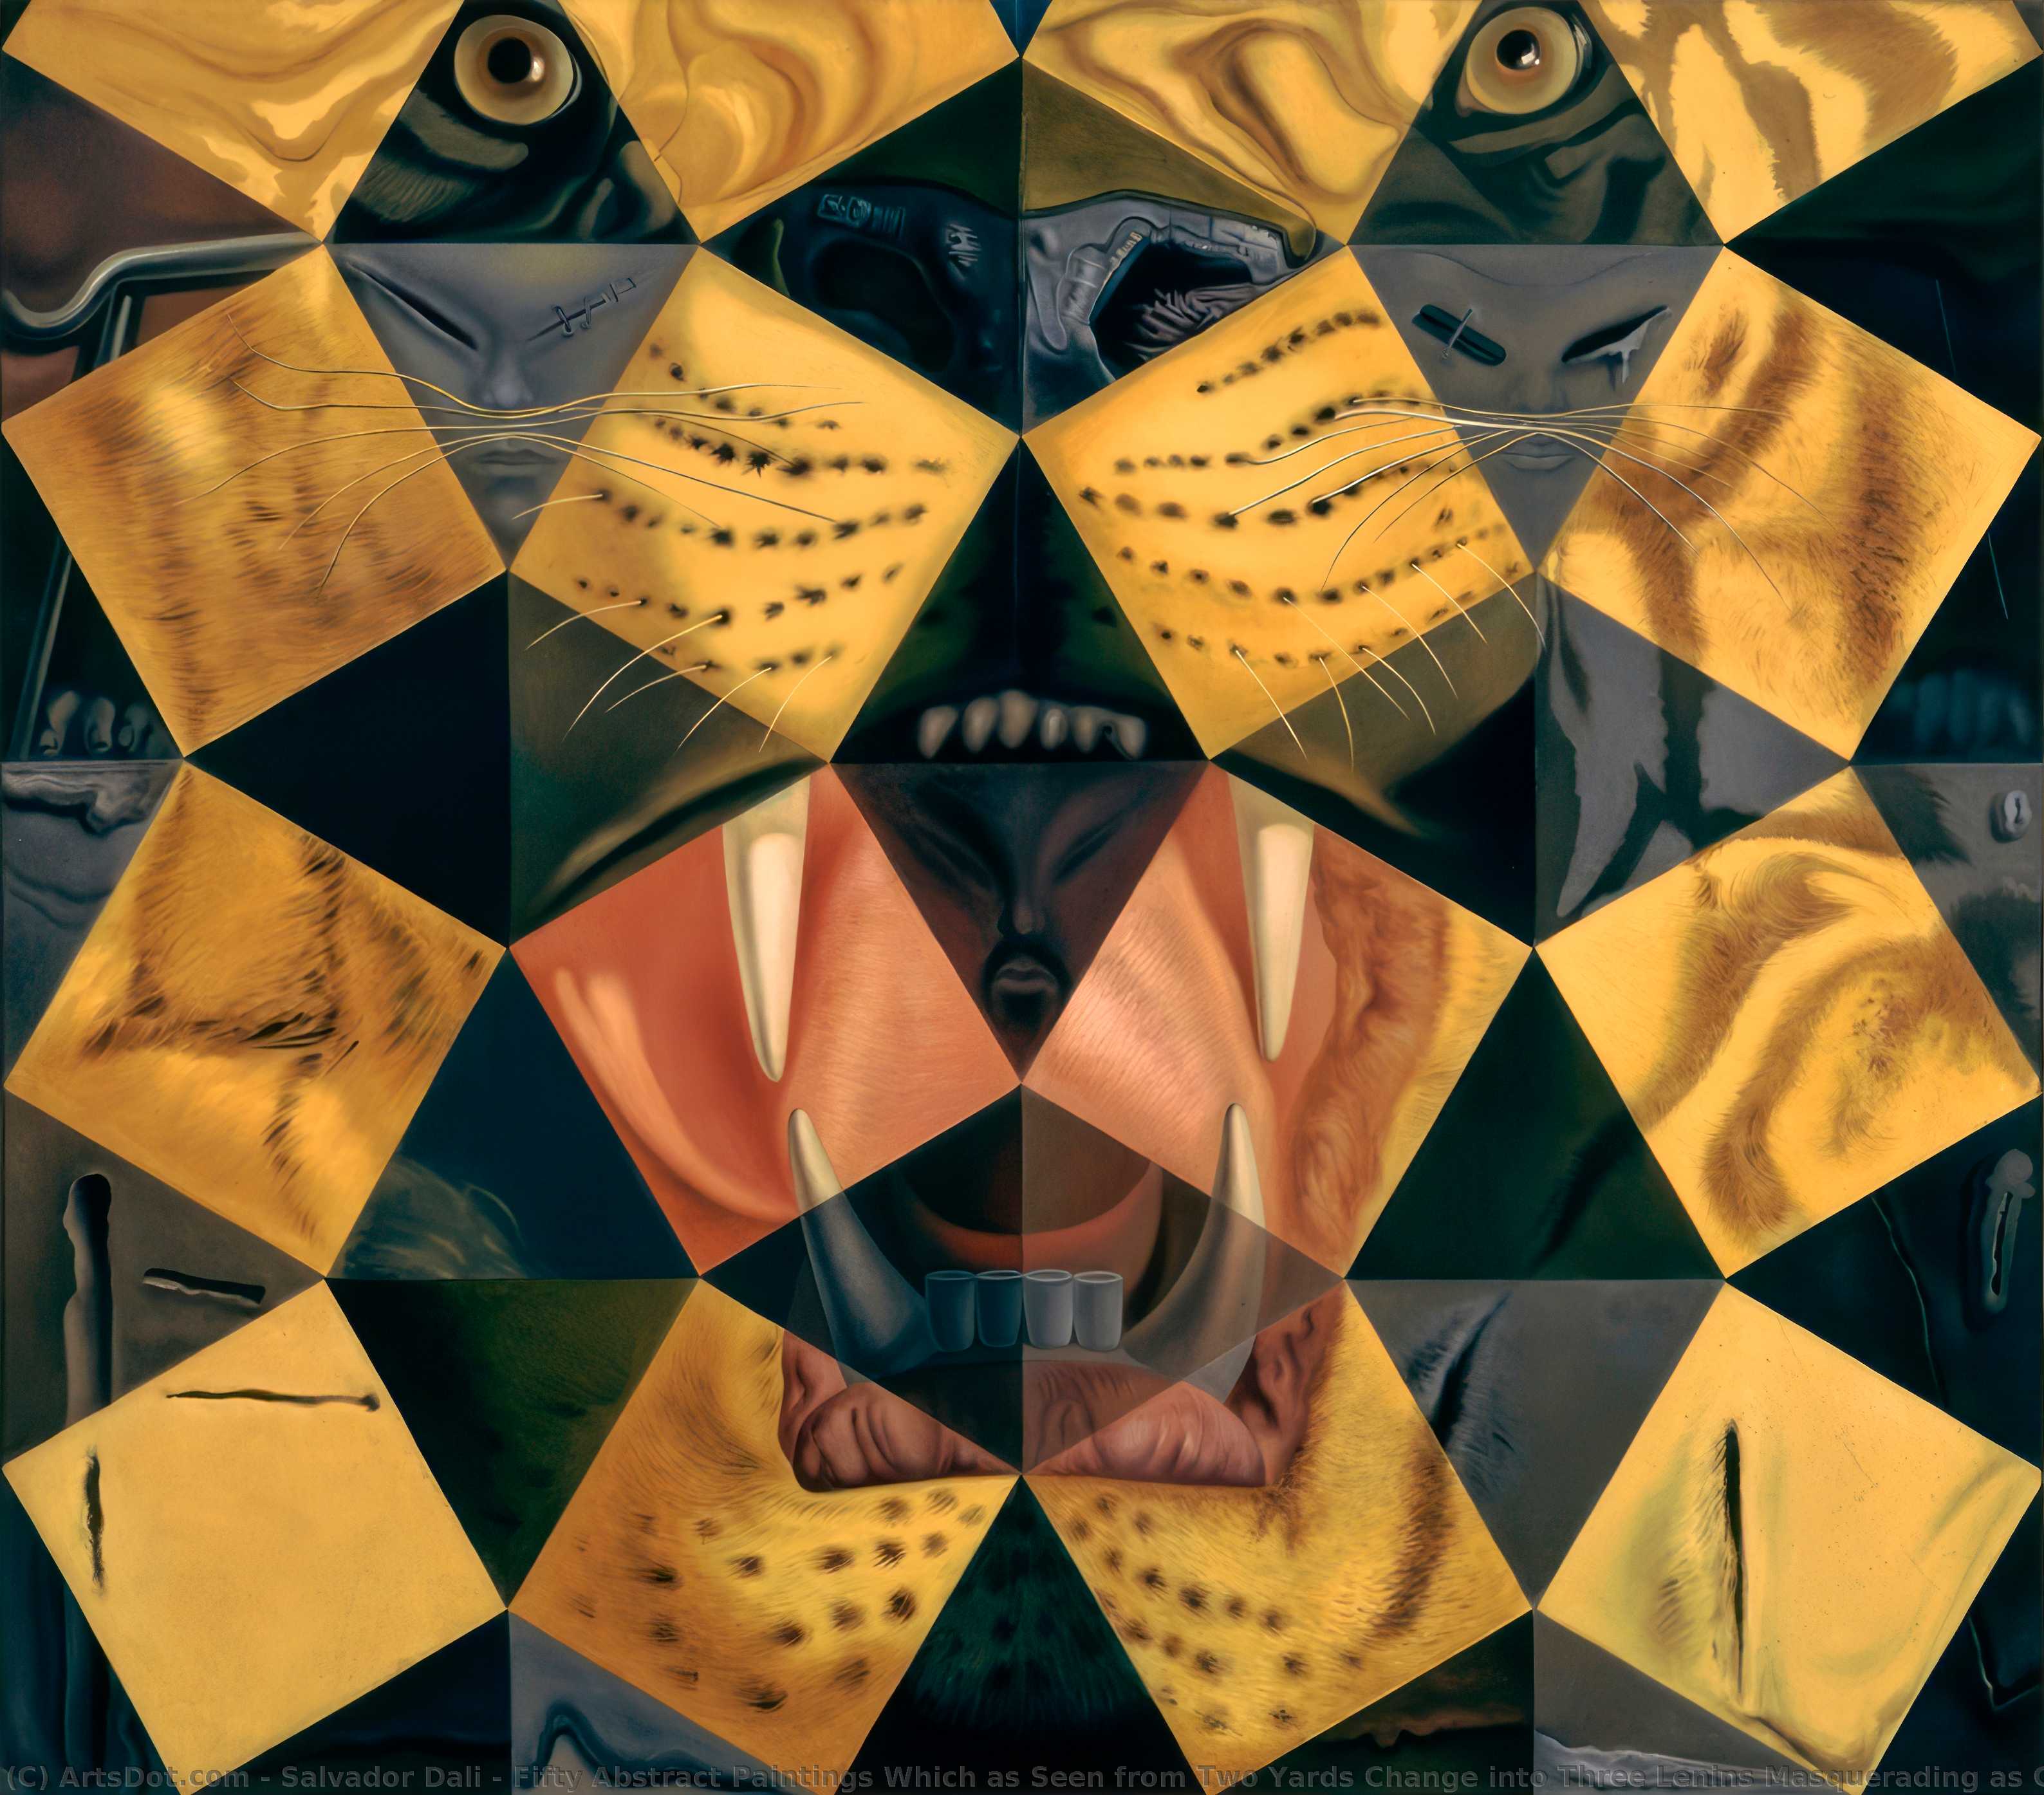 WikiOO.org - Güzel Sanatlar Ansiklopedisi - Resim, Resimler Salvador Dali - Fifty Abstract Paintings Which as Seen from Two Yards Change into Three Lenins Masquerading as Chinese and as Seen from Six Yards Appear as the Head of a Royal Bengal Tiger, 1963